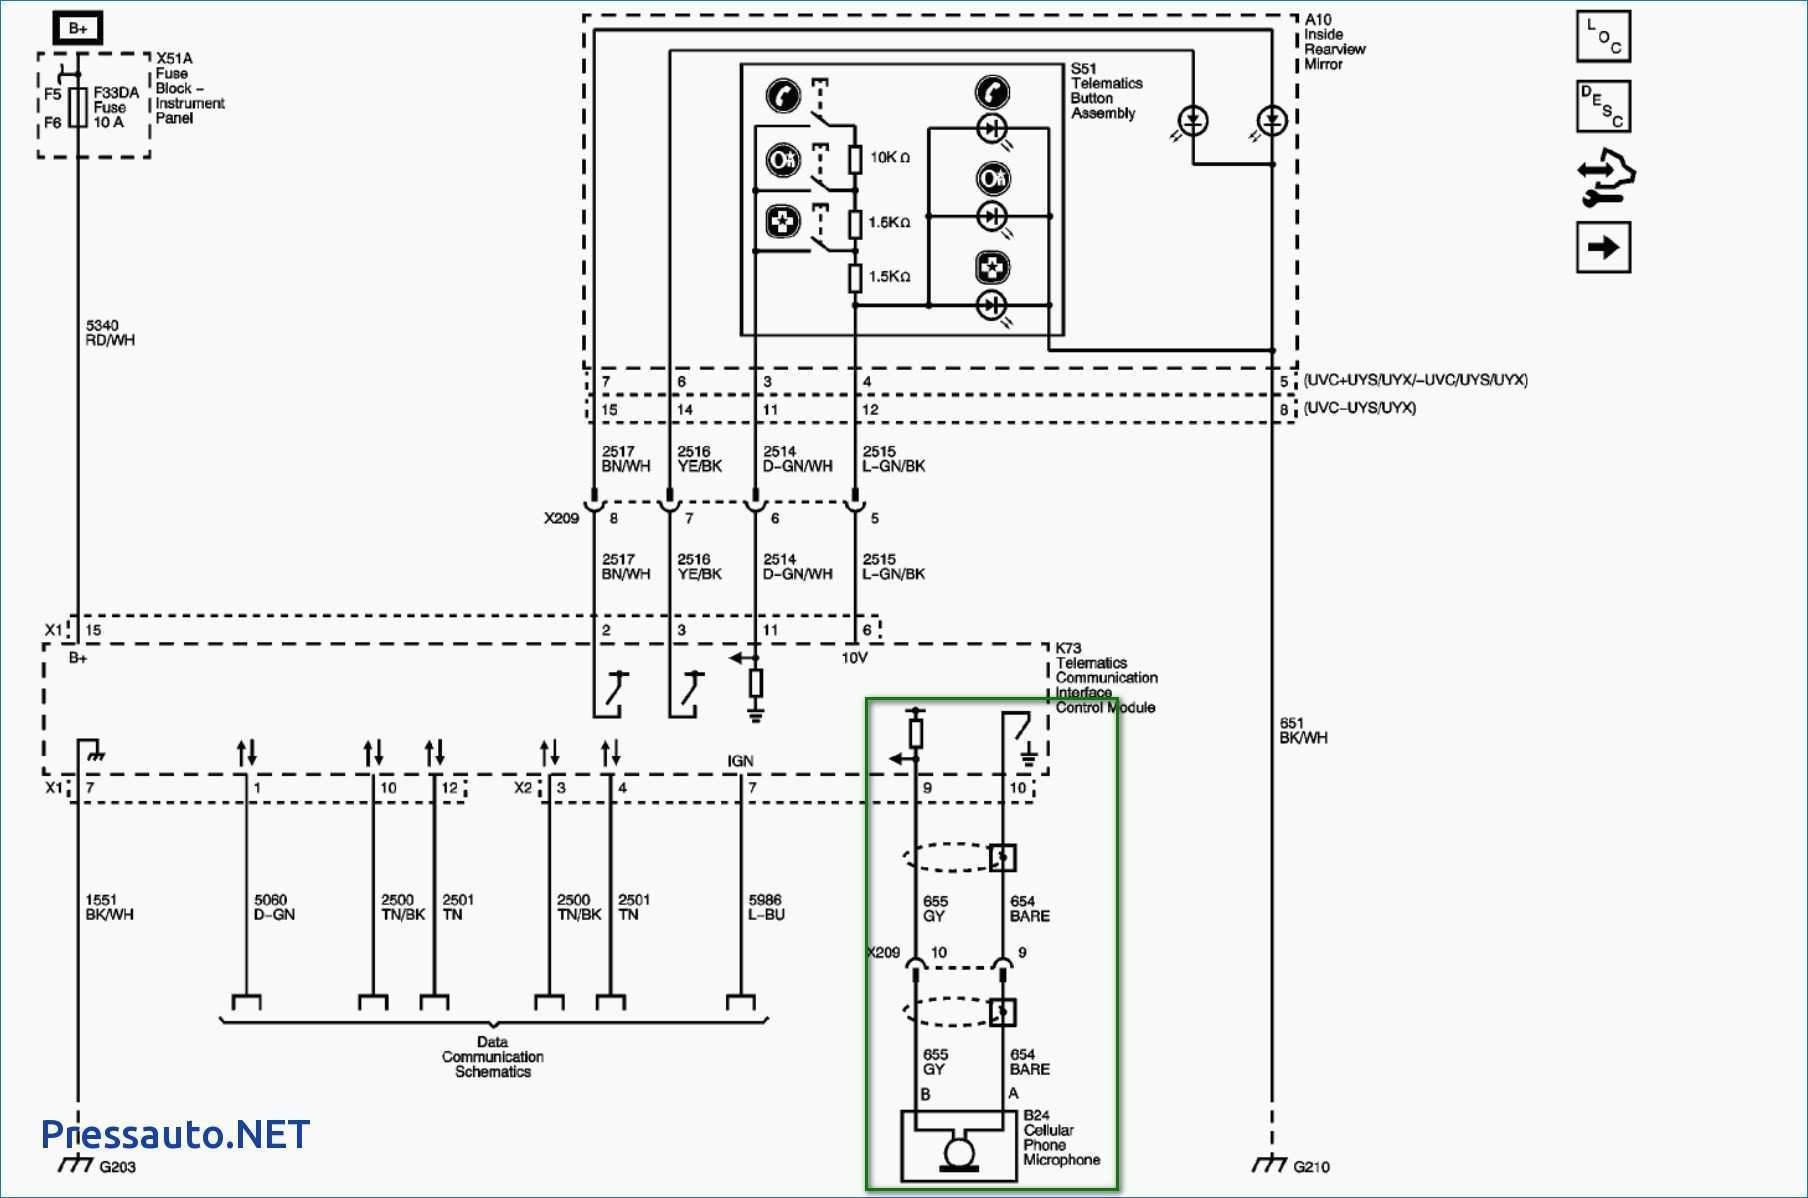 Stunning Pioneer Avh X2700bs Wiring Diagram Electrical Nakamichi Stereo Wiring Diagram Ls400 Audio System Clublexus